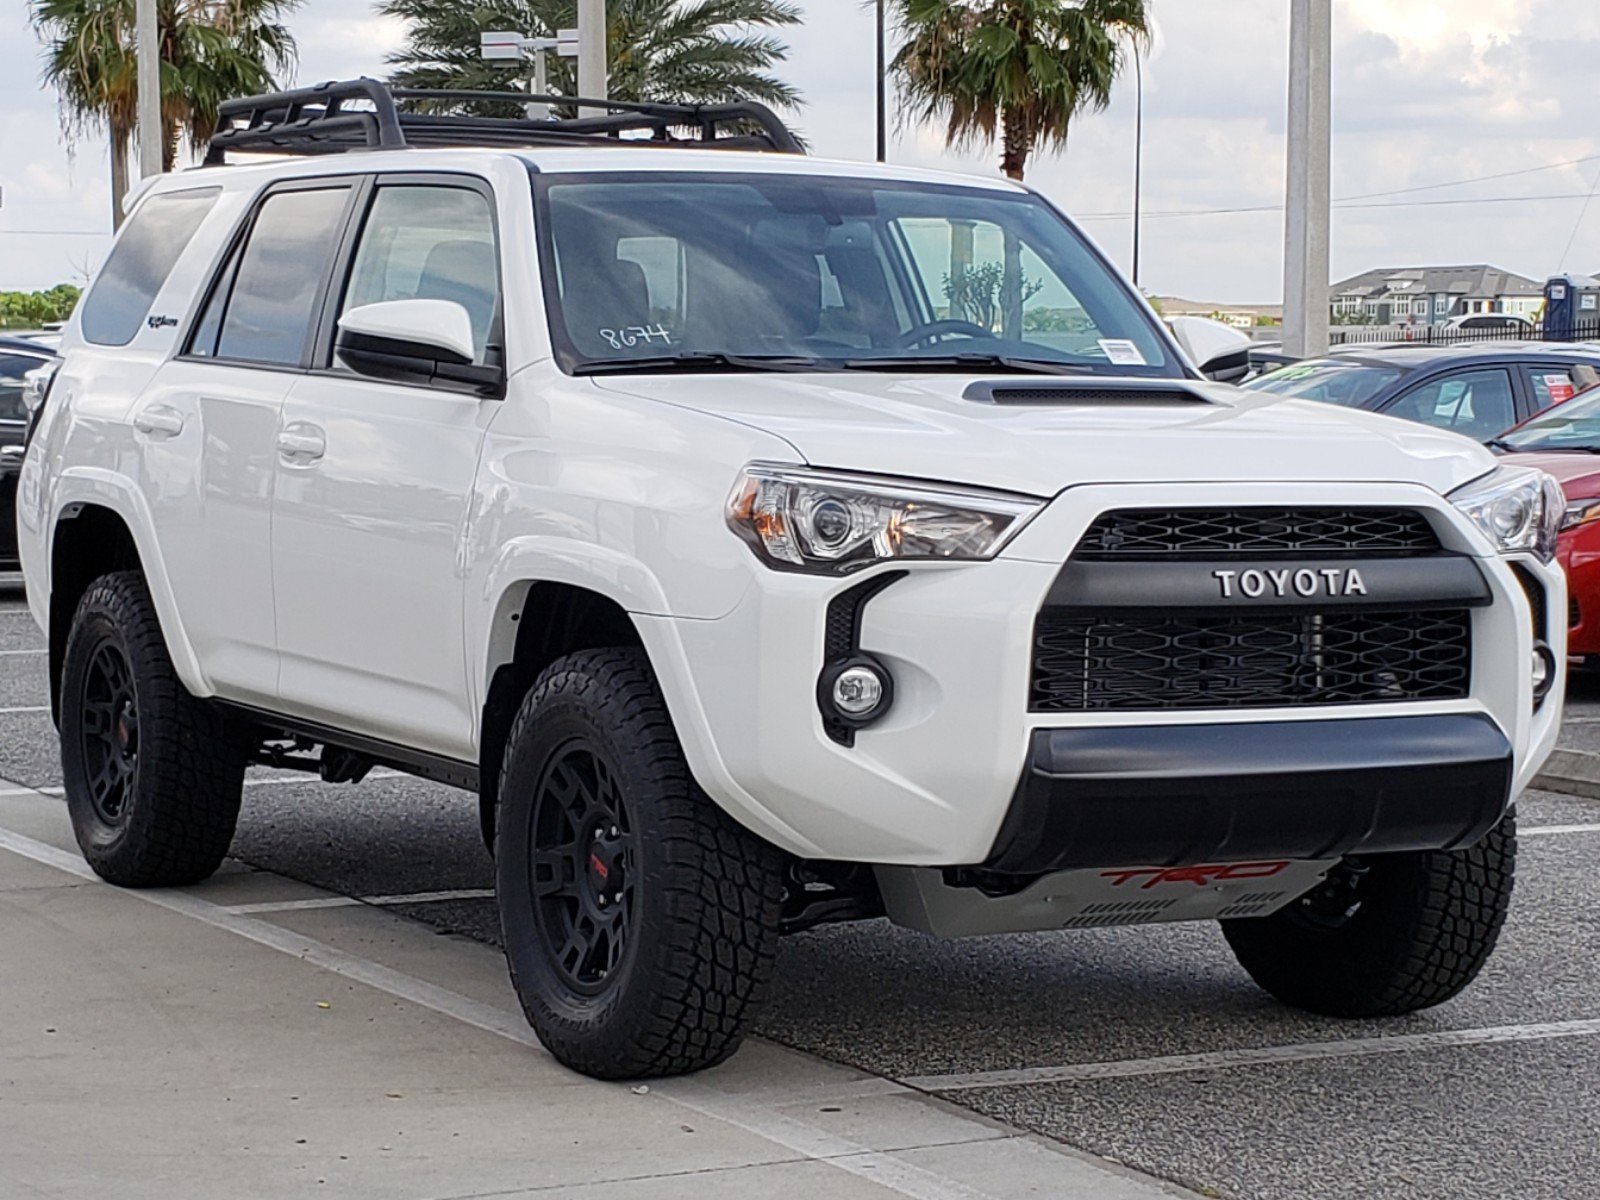 The New Toyota 4Runner is Comfortable, Capable and Built to Last - Real